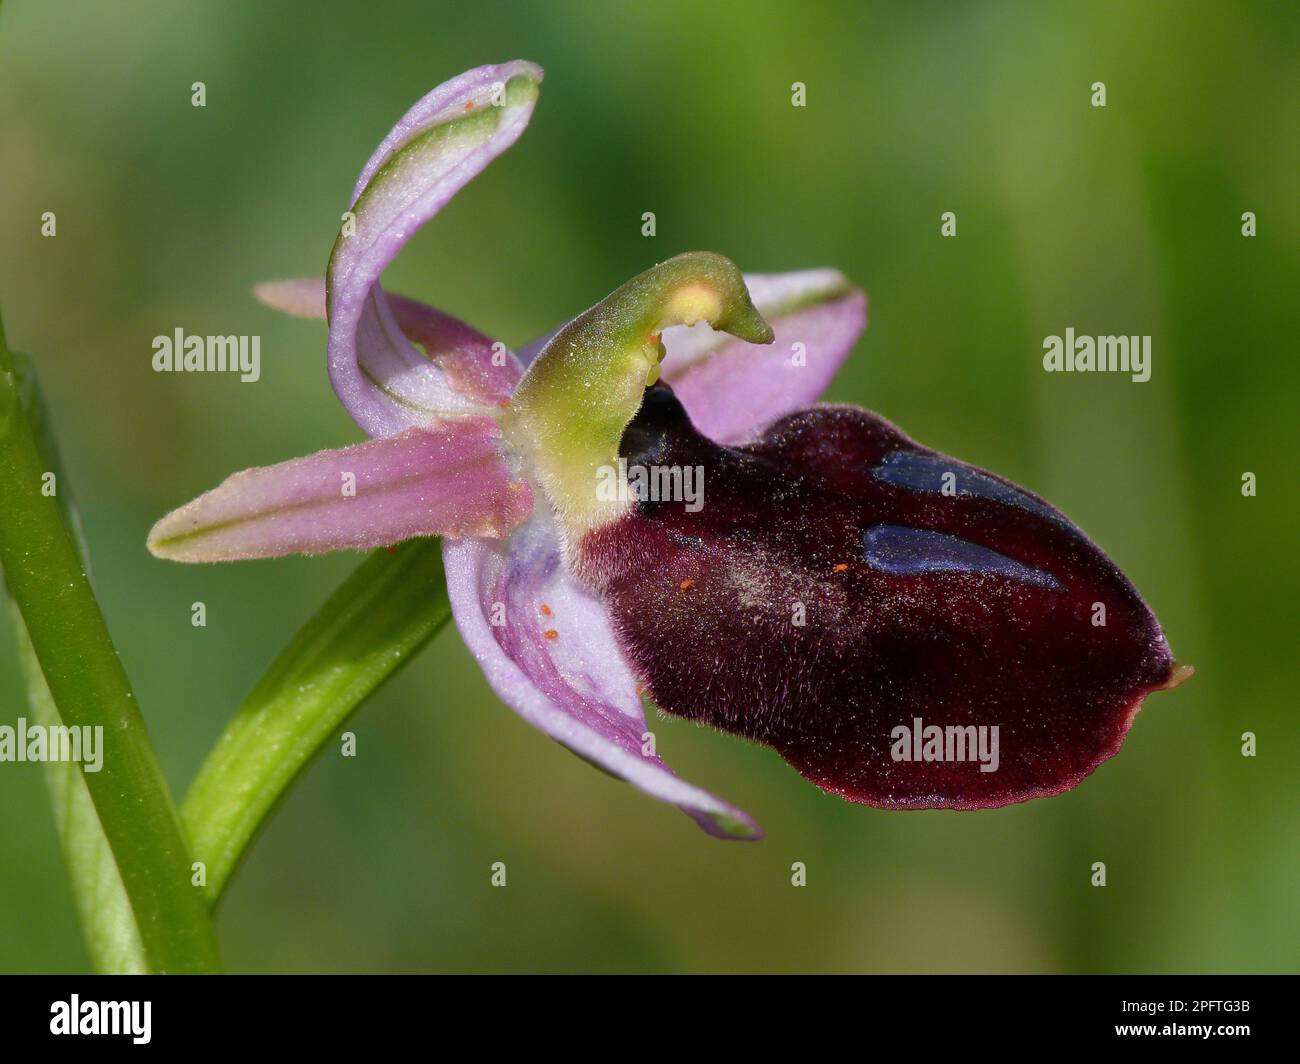 Horseshoe bee-orchid (Ophrys ferrum-equinum), Orchids, Horseshoe orchid close-up of flower, Peloponesos, Southern Greece Stock Photo